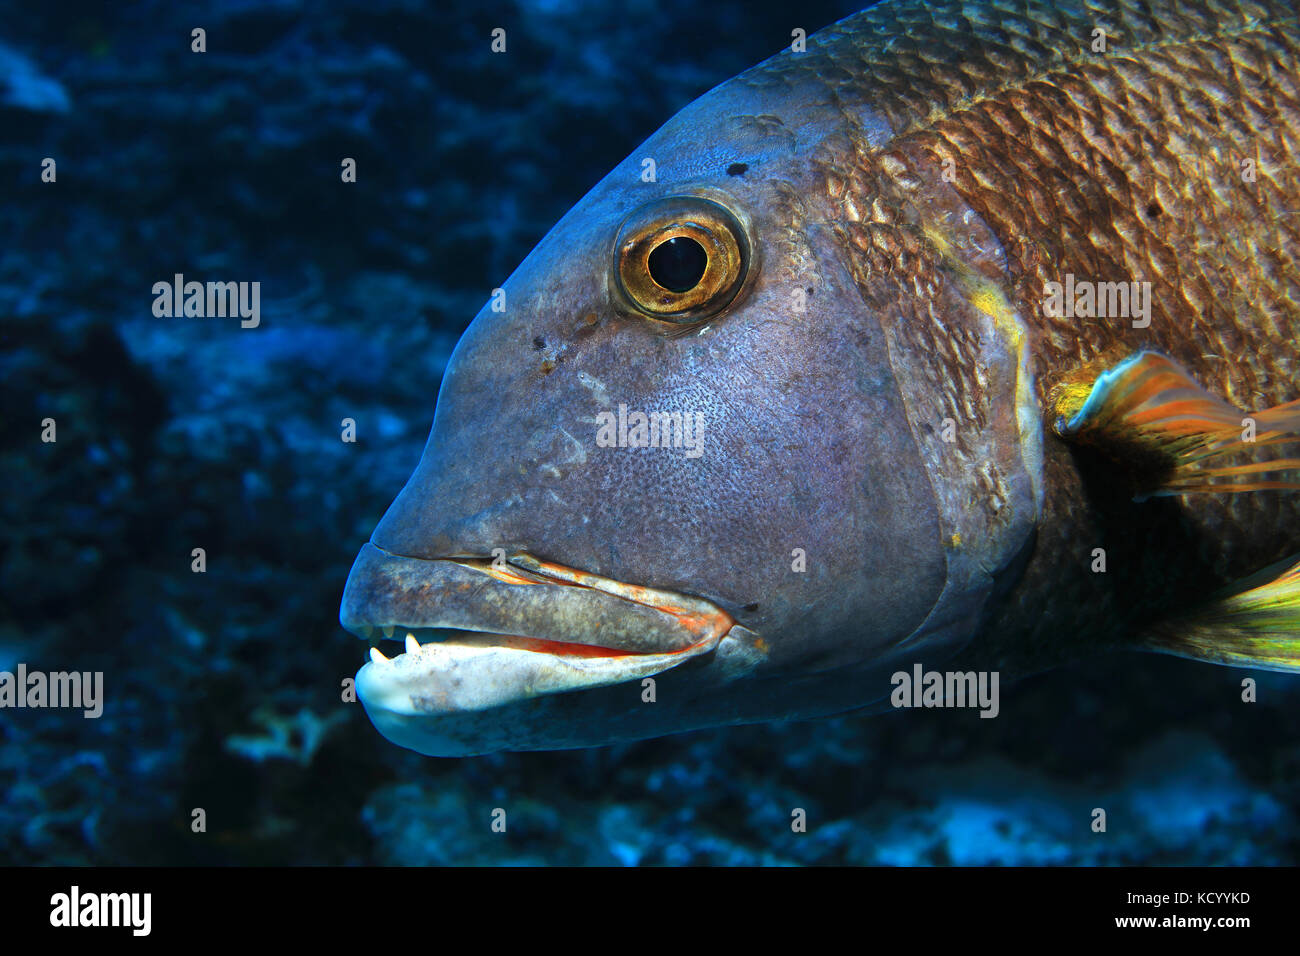 Orange-spotted emperor fish (Lethrinus erythracanthus) underwater in the tropical indian ocean Stock Photo